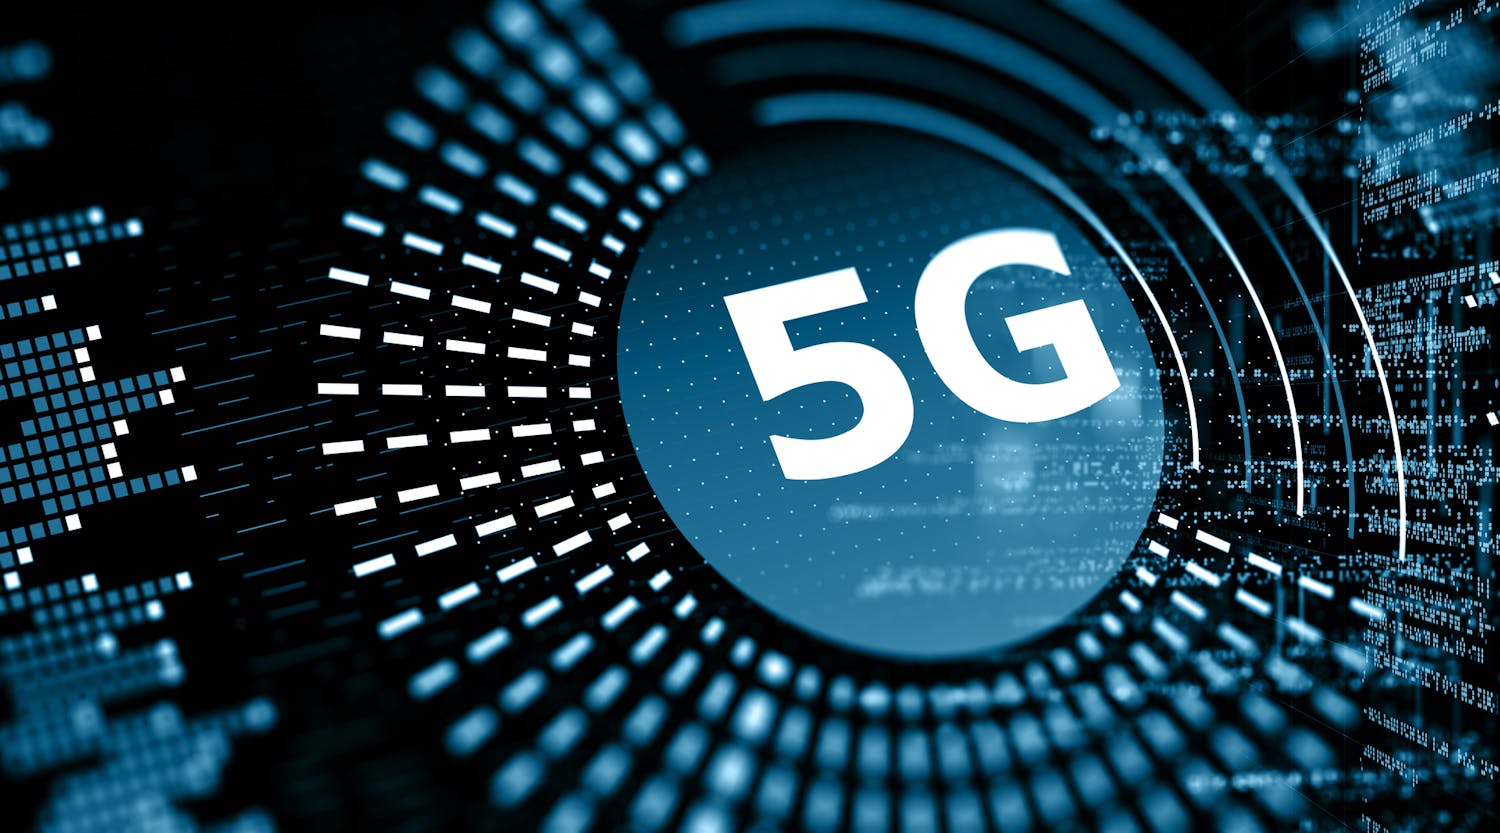 5G Fixed Wireless Access (FWA) will give users internet access with wireless mobile network technology instead of fixed lines. This creates a massive business opportunity for systems integrators.